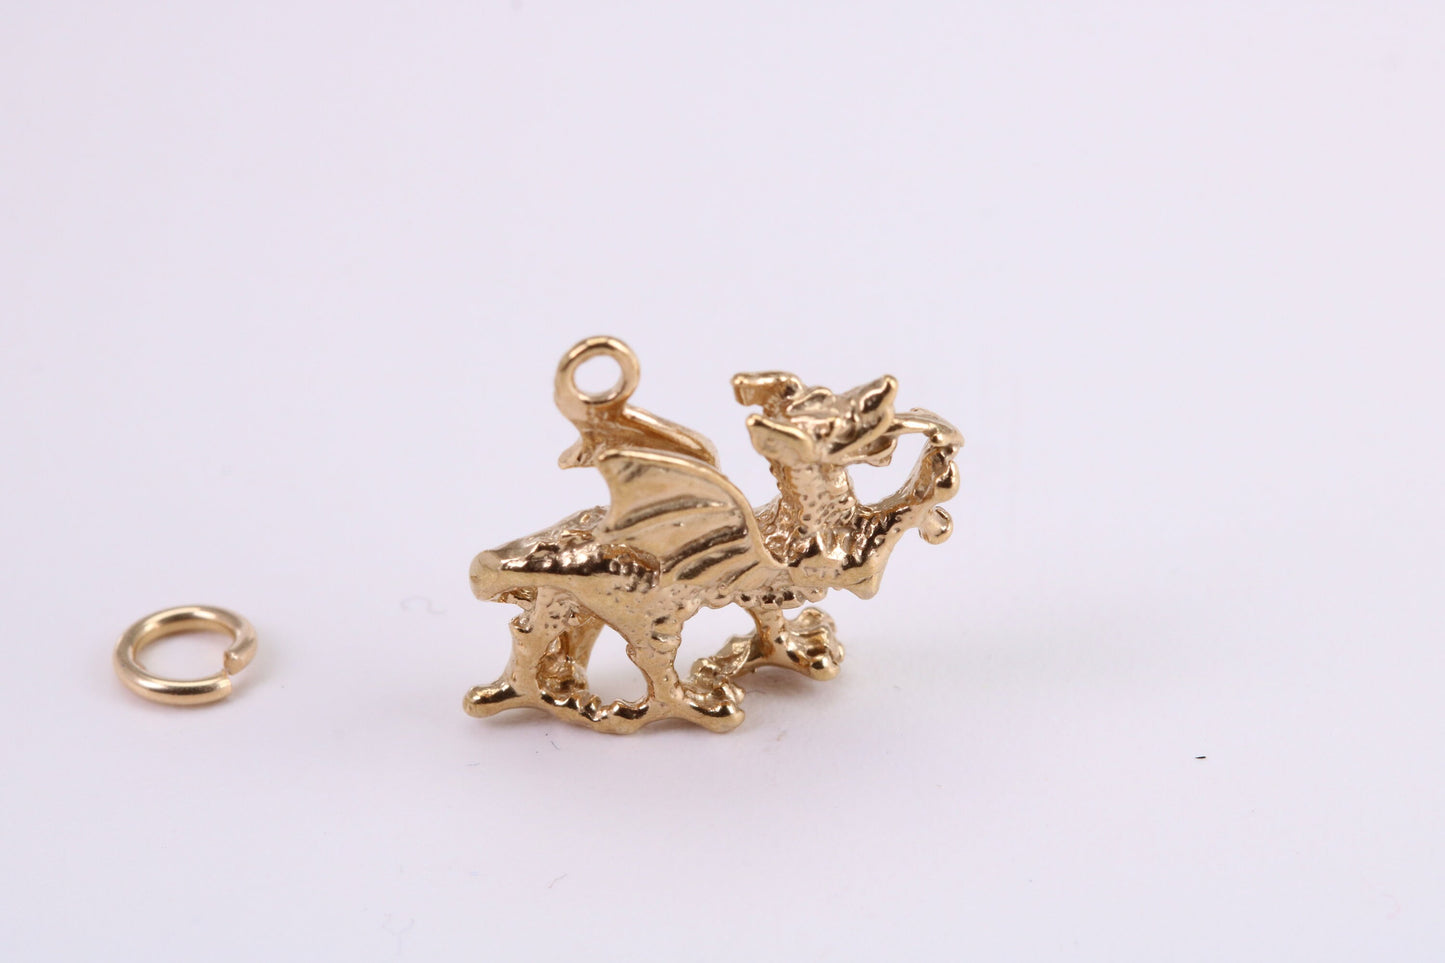 Welsh Dragon Charm, Traditional Charm, Made from Solid Yellow Gold, British Hallmarked, Complete with Attachment Link